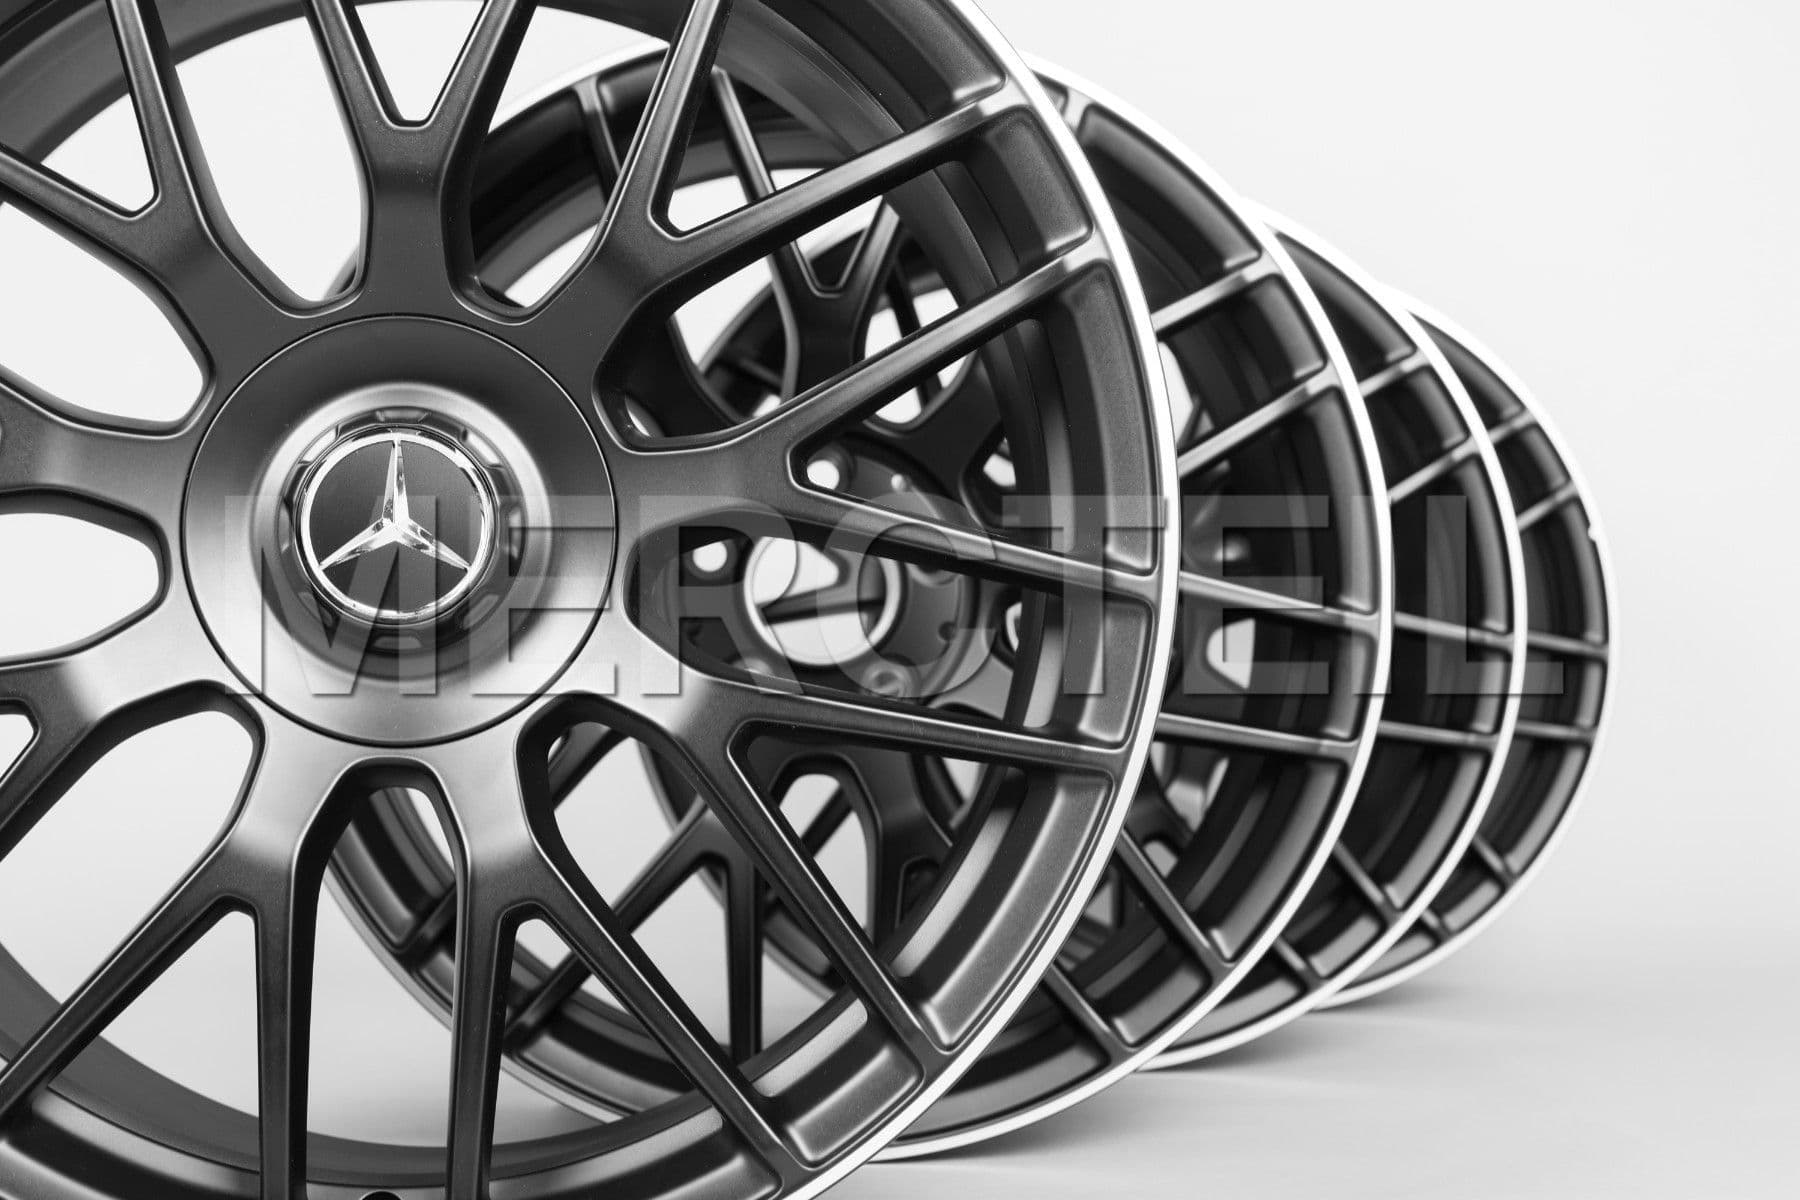 AMG GT Wheels Forged Black Genuine Mercedes Benz (part number: A19040107007X71)